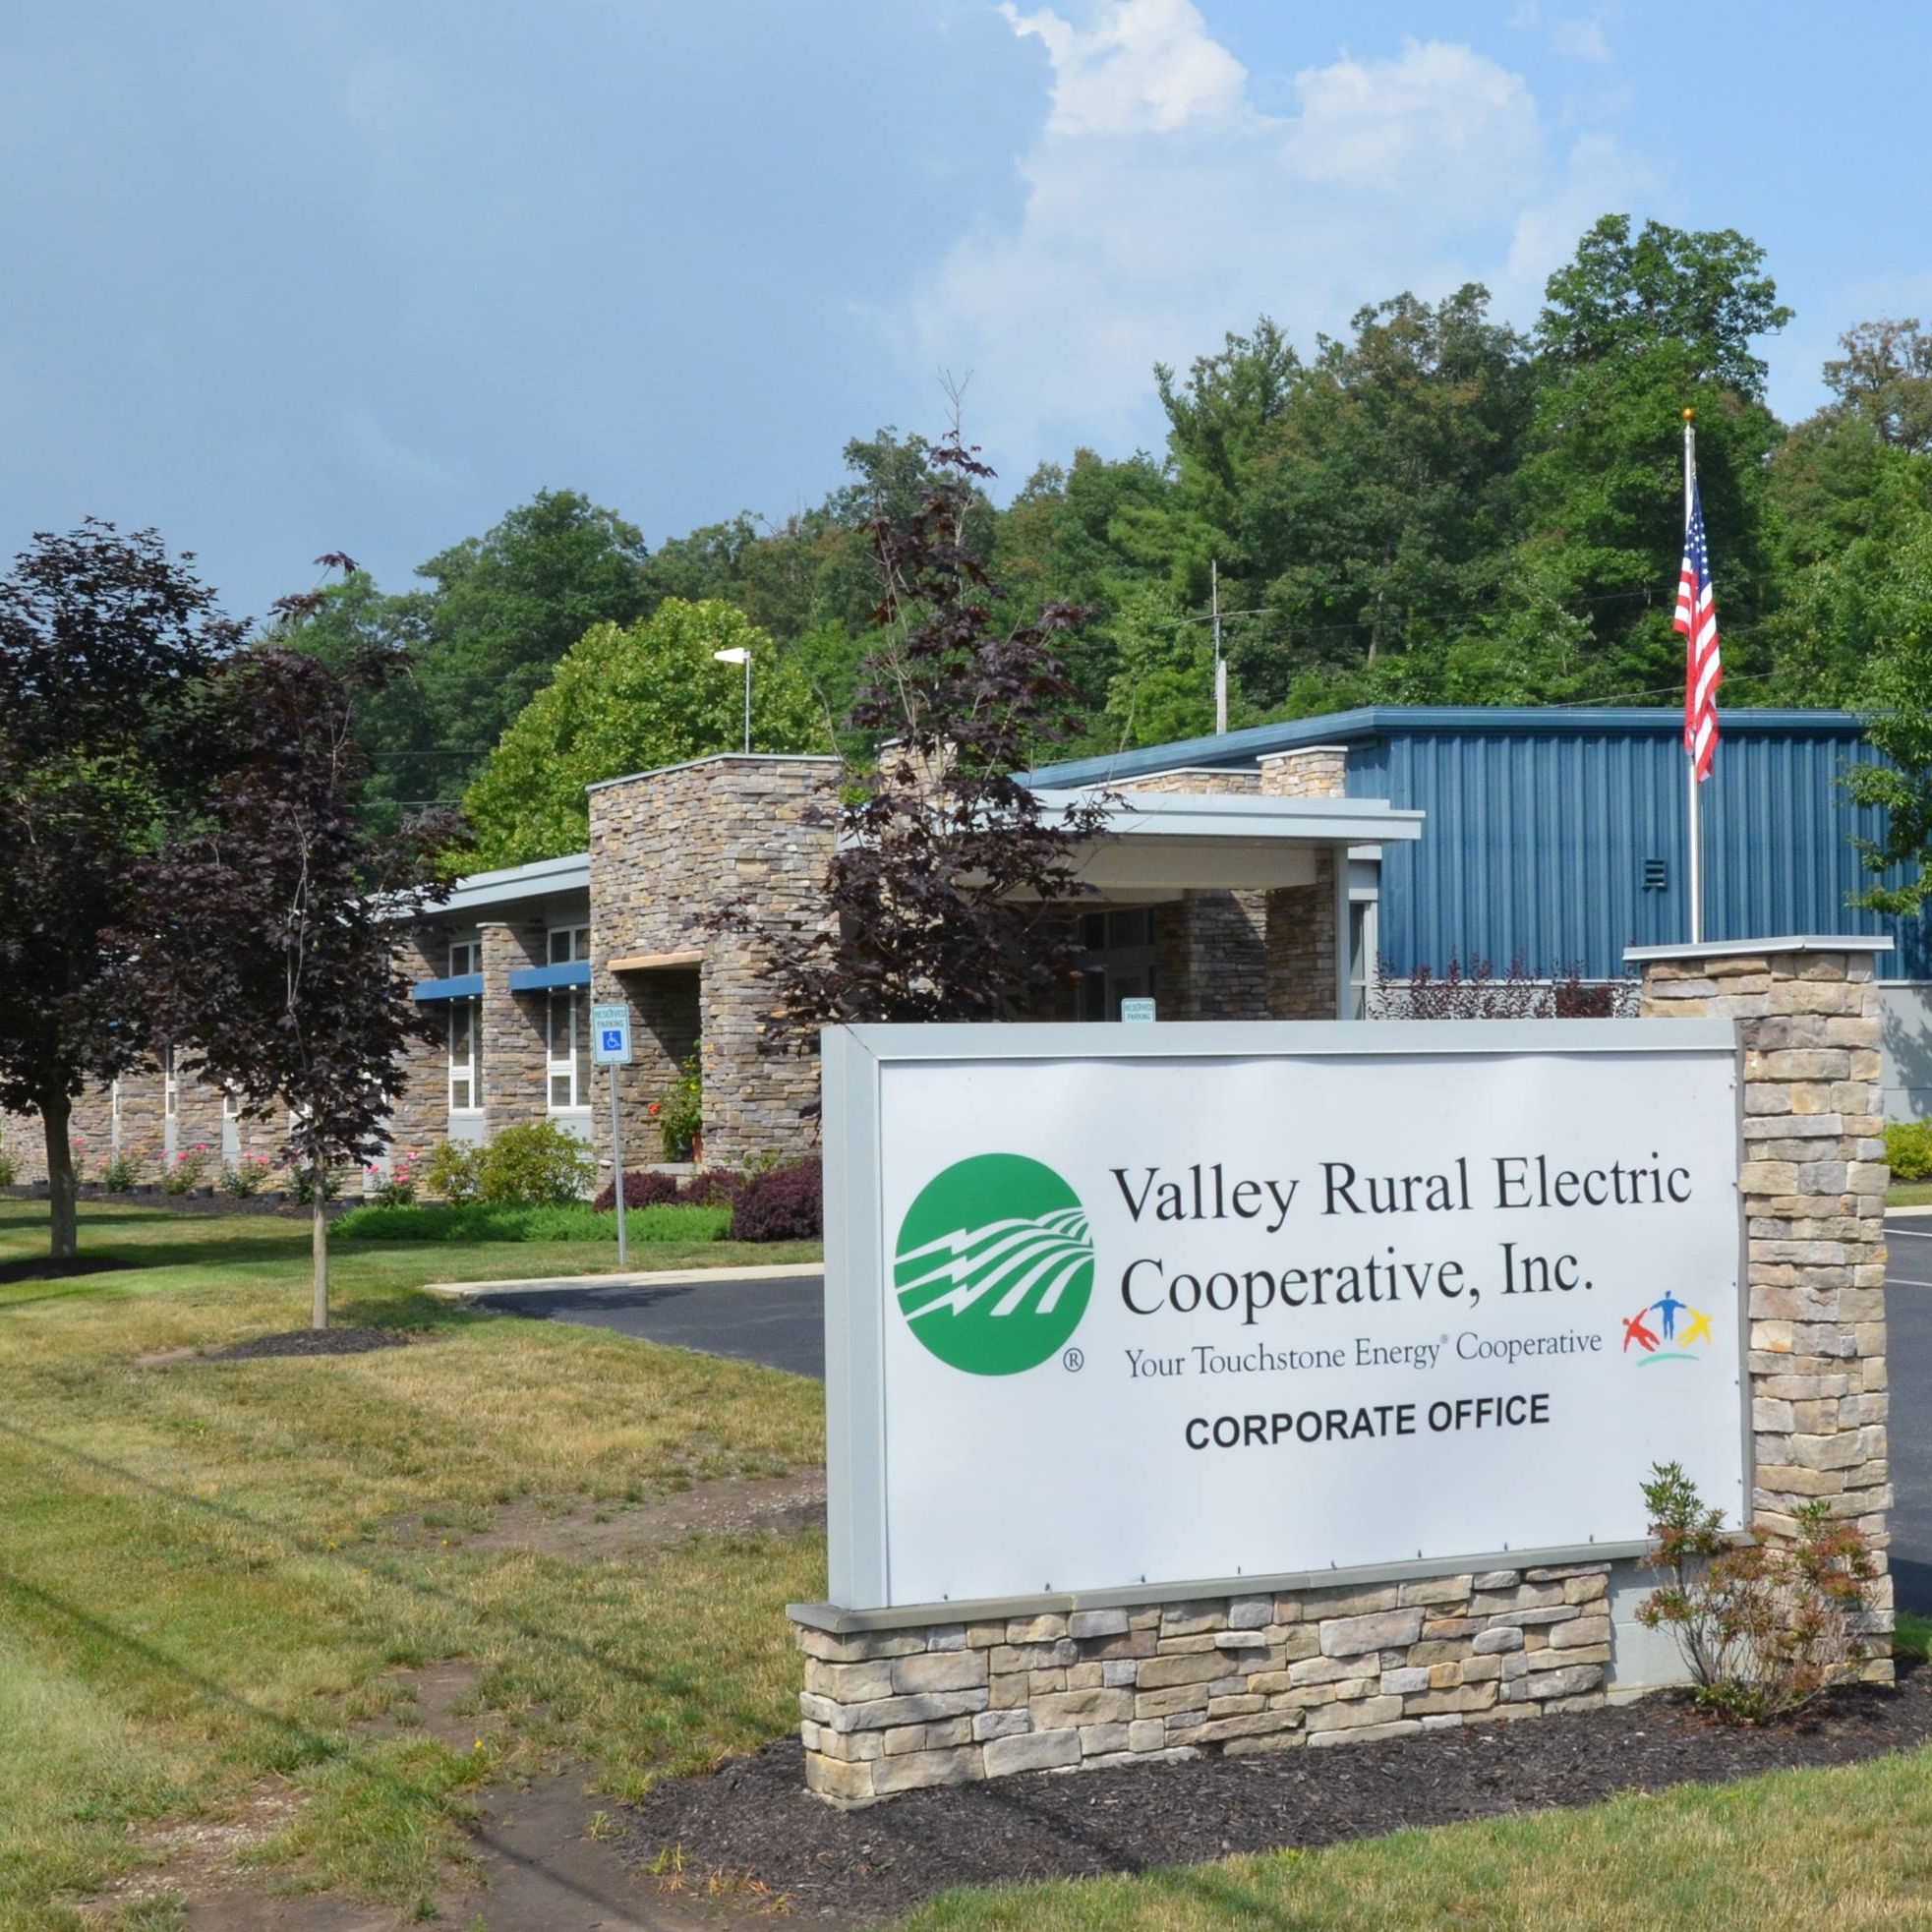 Valley Rural Electric Cooperative